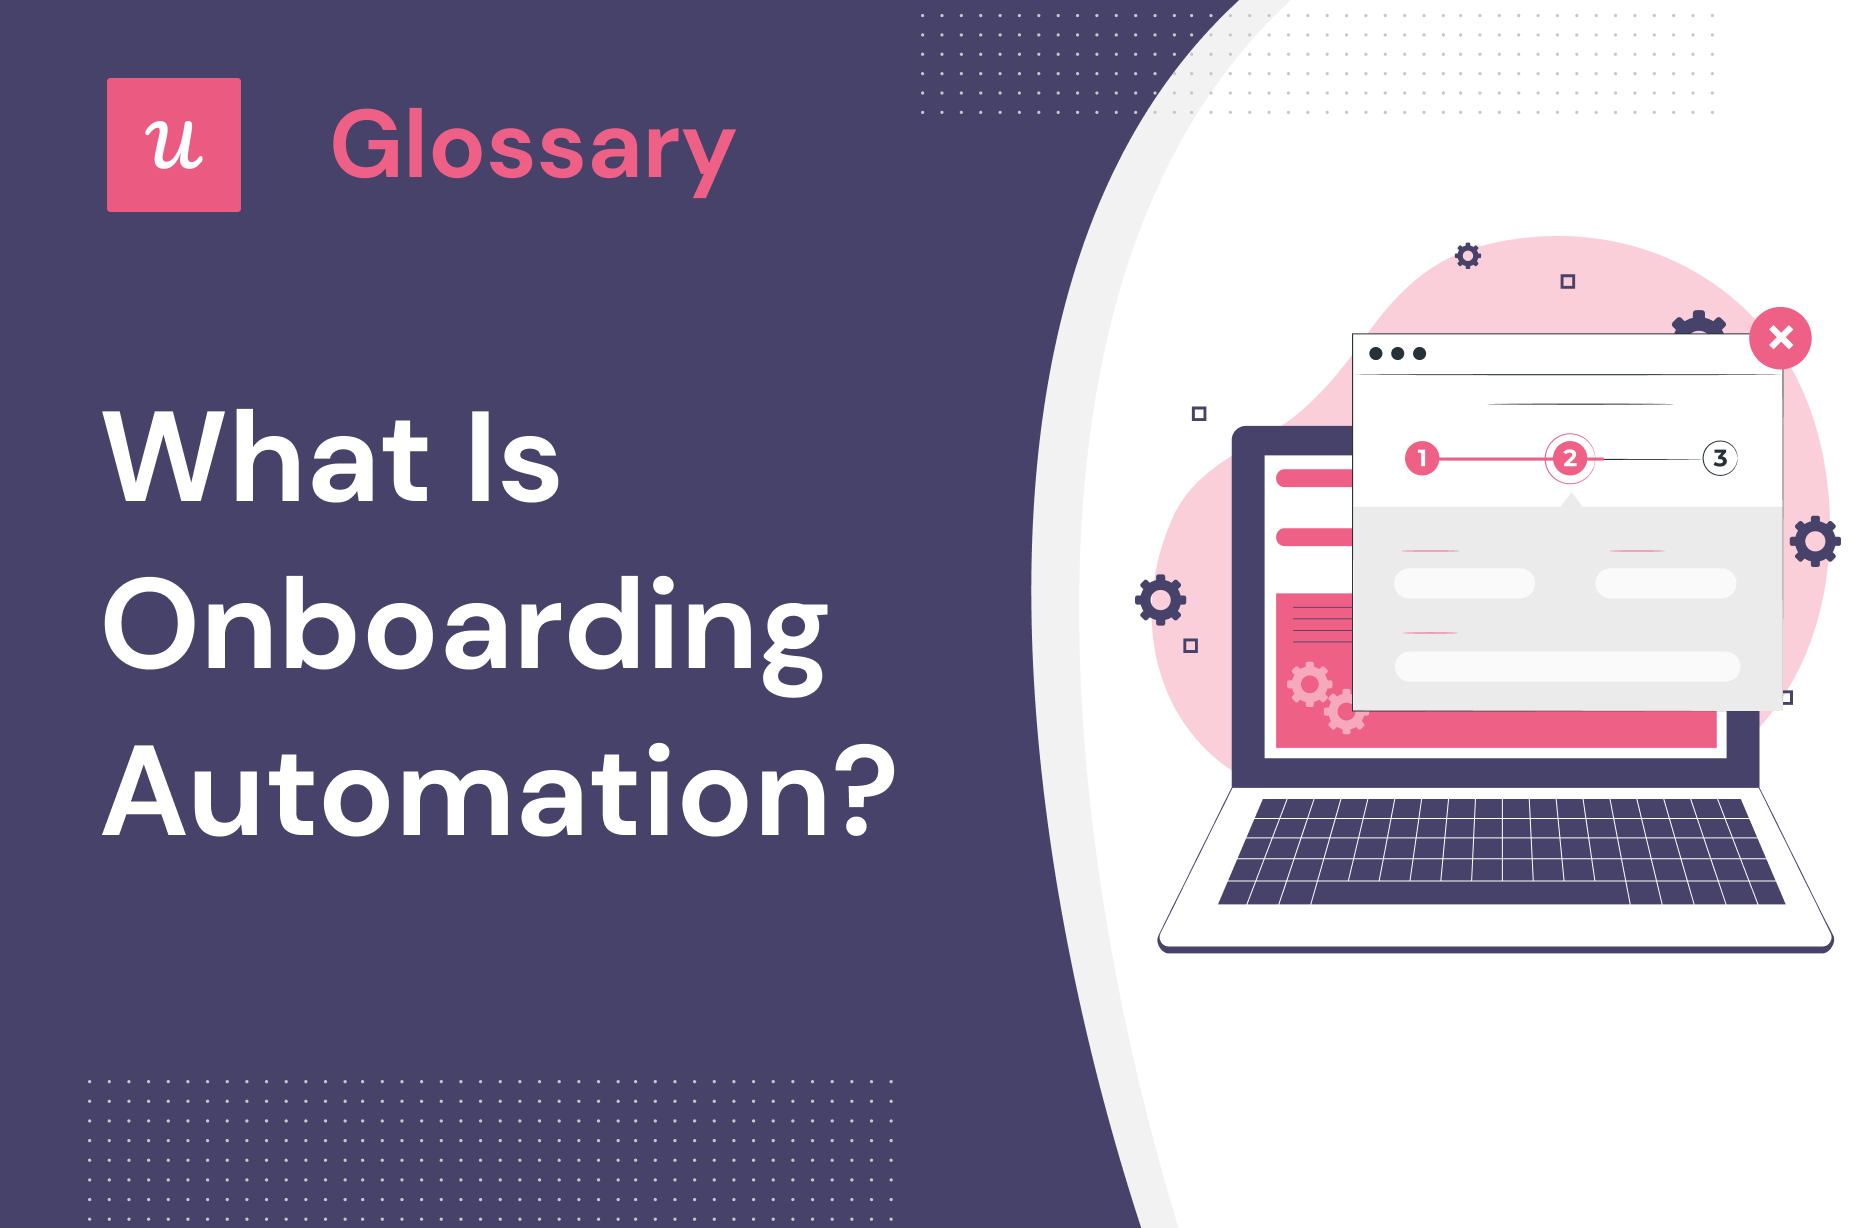 What is Onboarding Automation?